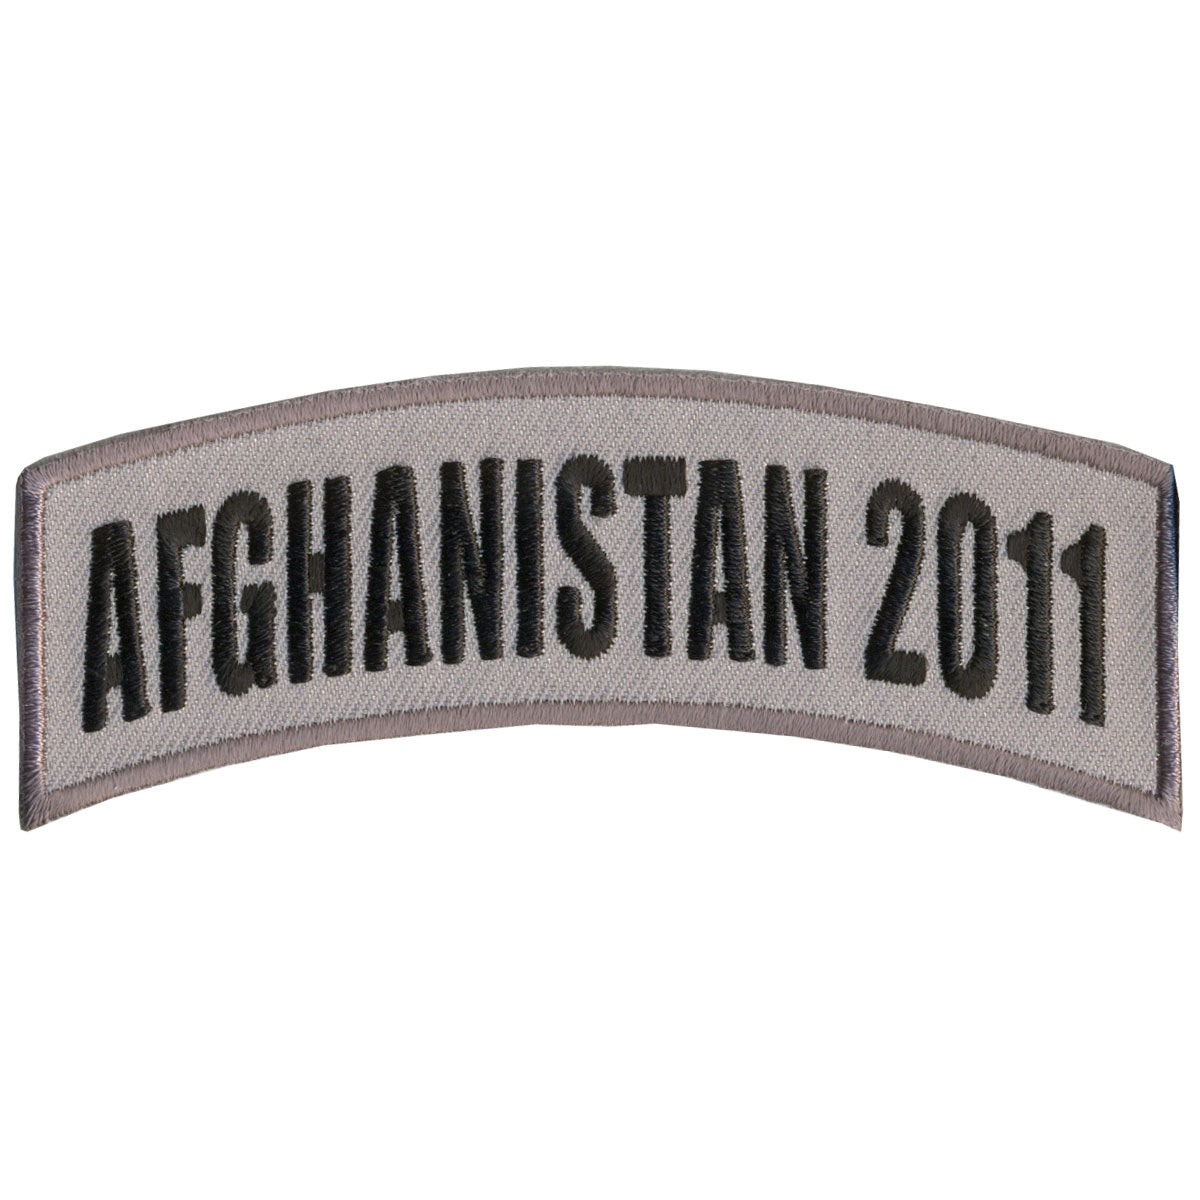 Hot Leathers Afghanistan 2011 4" x 1" Patch